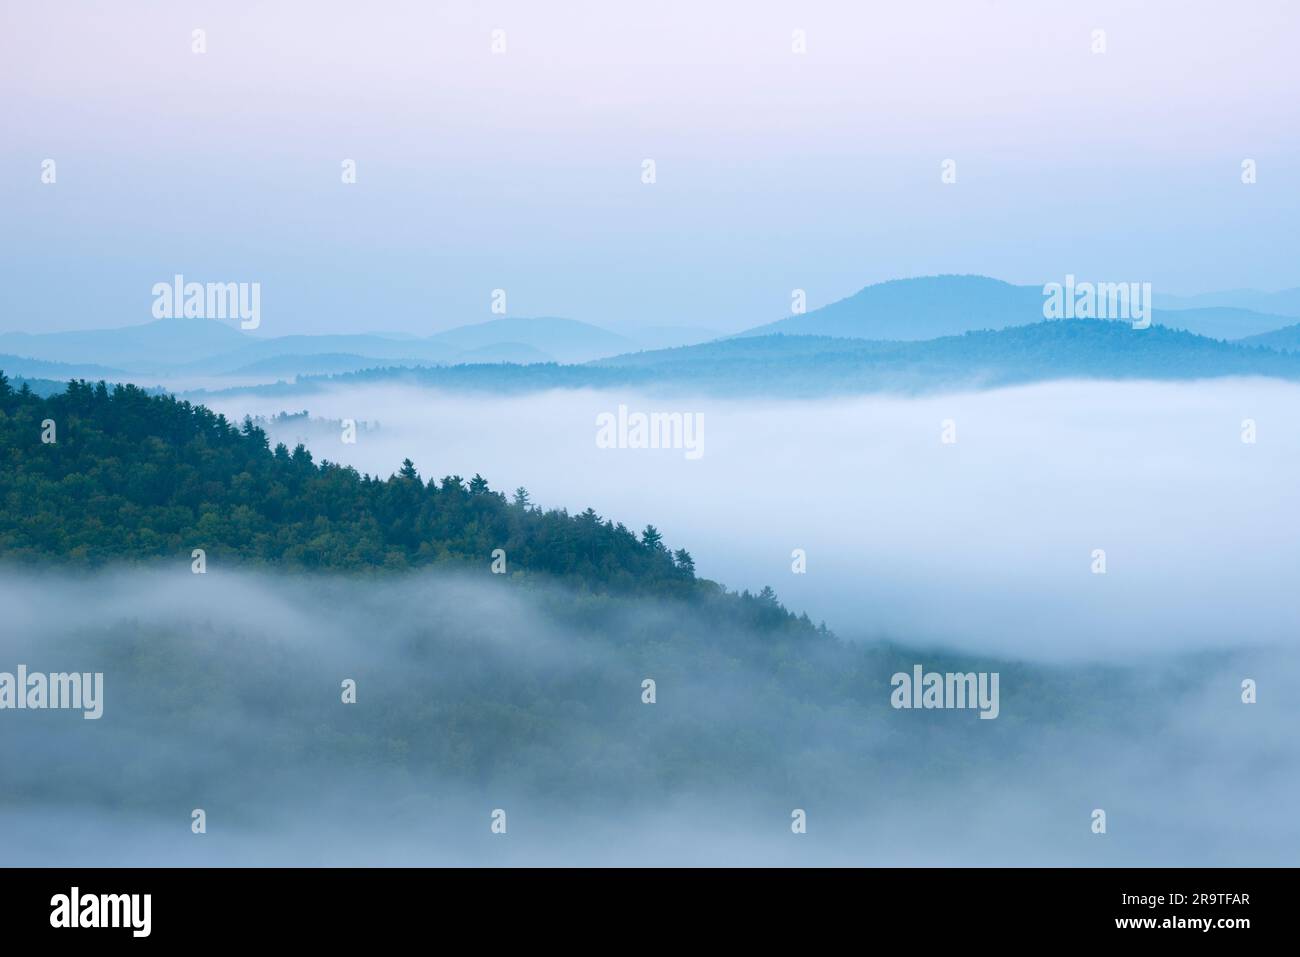 Landscape covered with thick clouds From Kipp Mountain, Adirondack Mountains, New York, USA Stock Photo